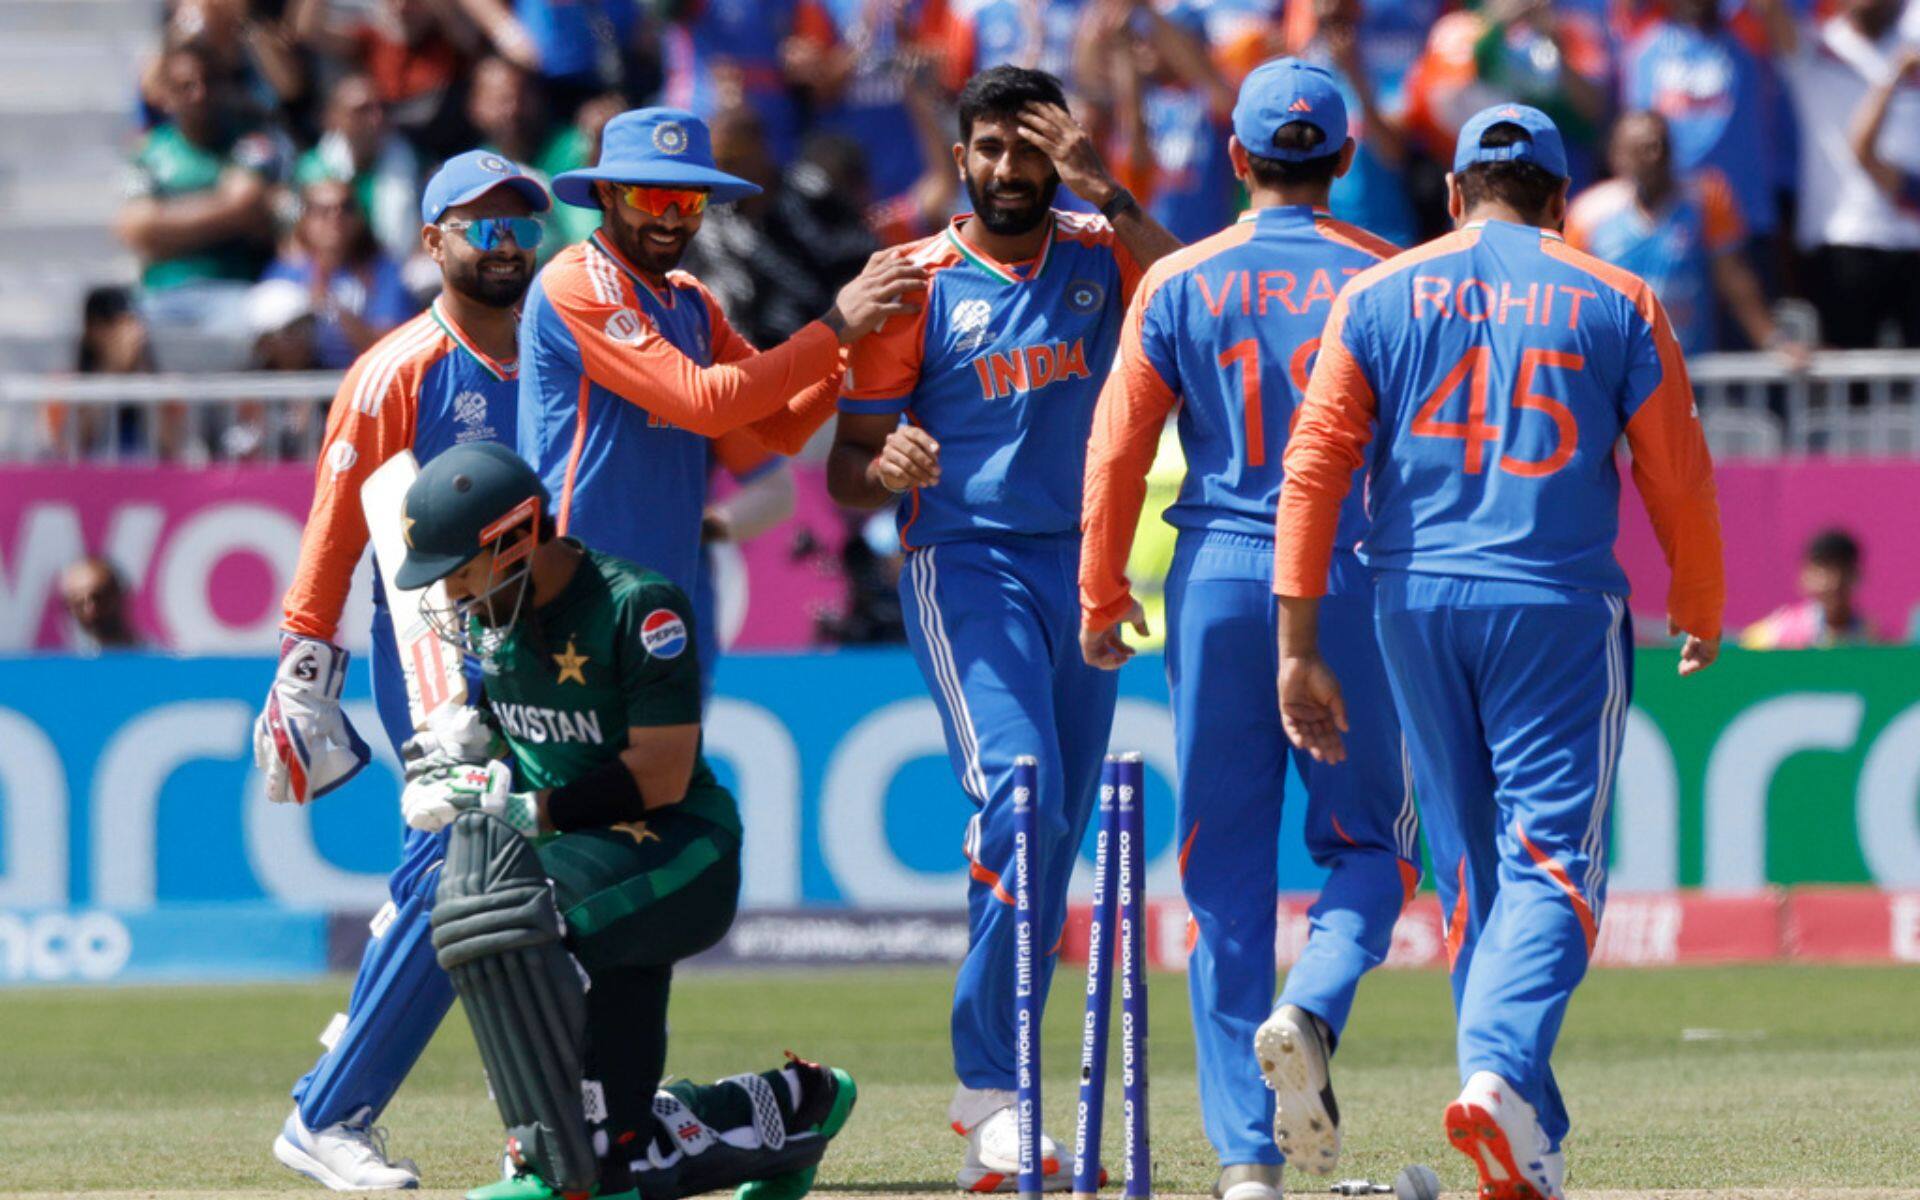 'Pakistan Require Major Surgery': 'Angry' PCB Chief Reacts Prematurely To Team's Defeat Vs India